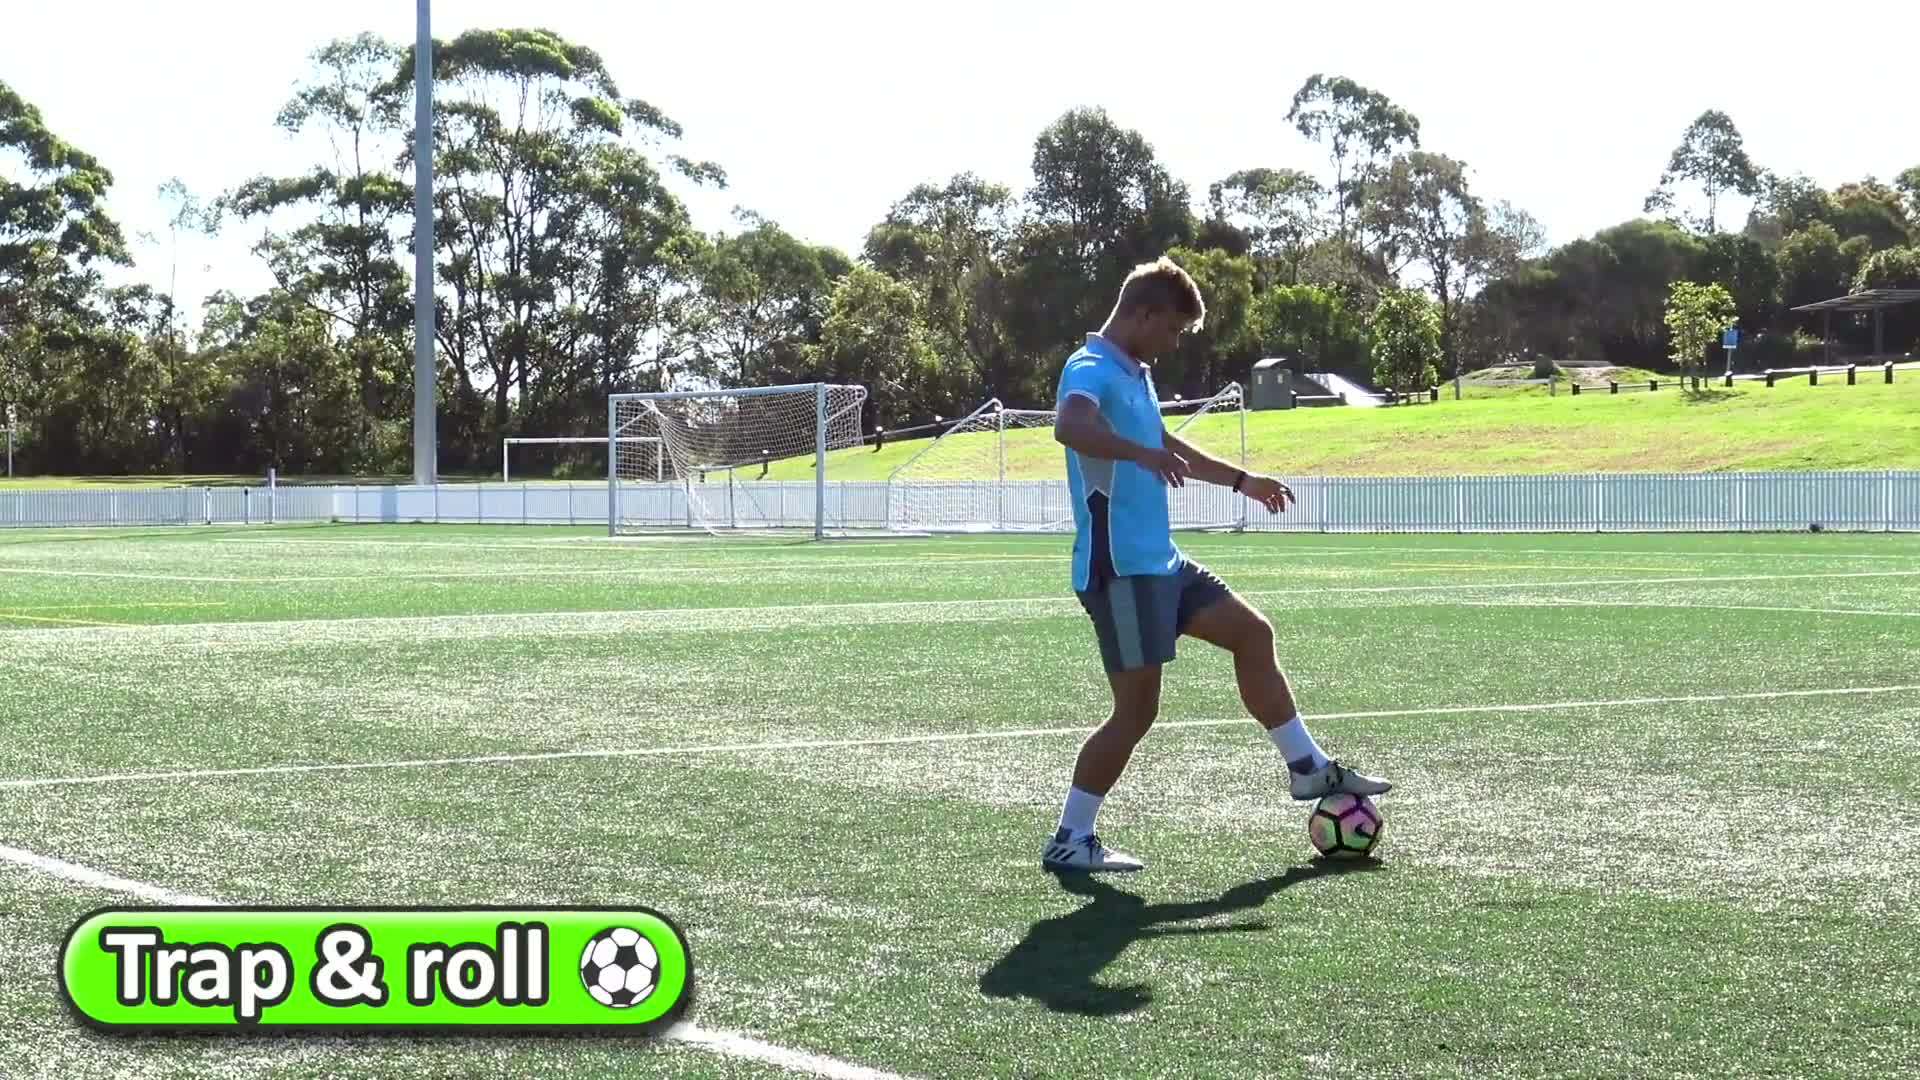 Individual ball challenges: Part 1 | Soccer skills in PE (grade K-6)